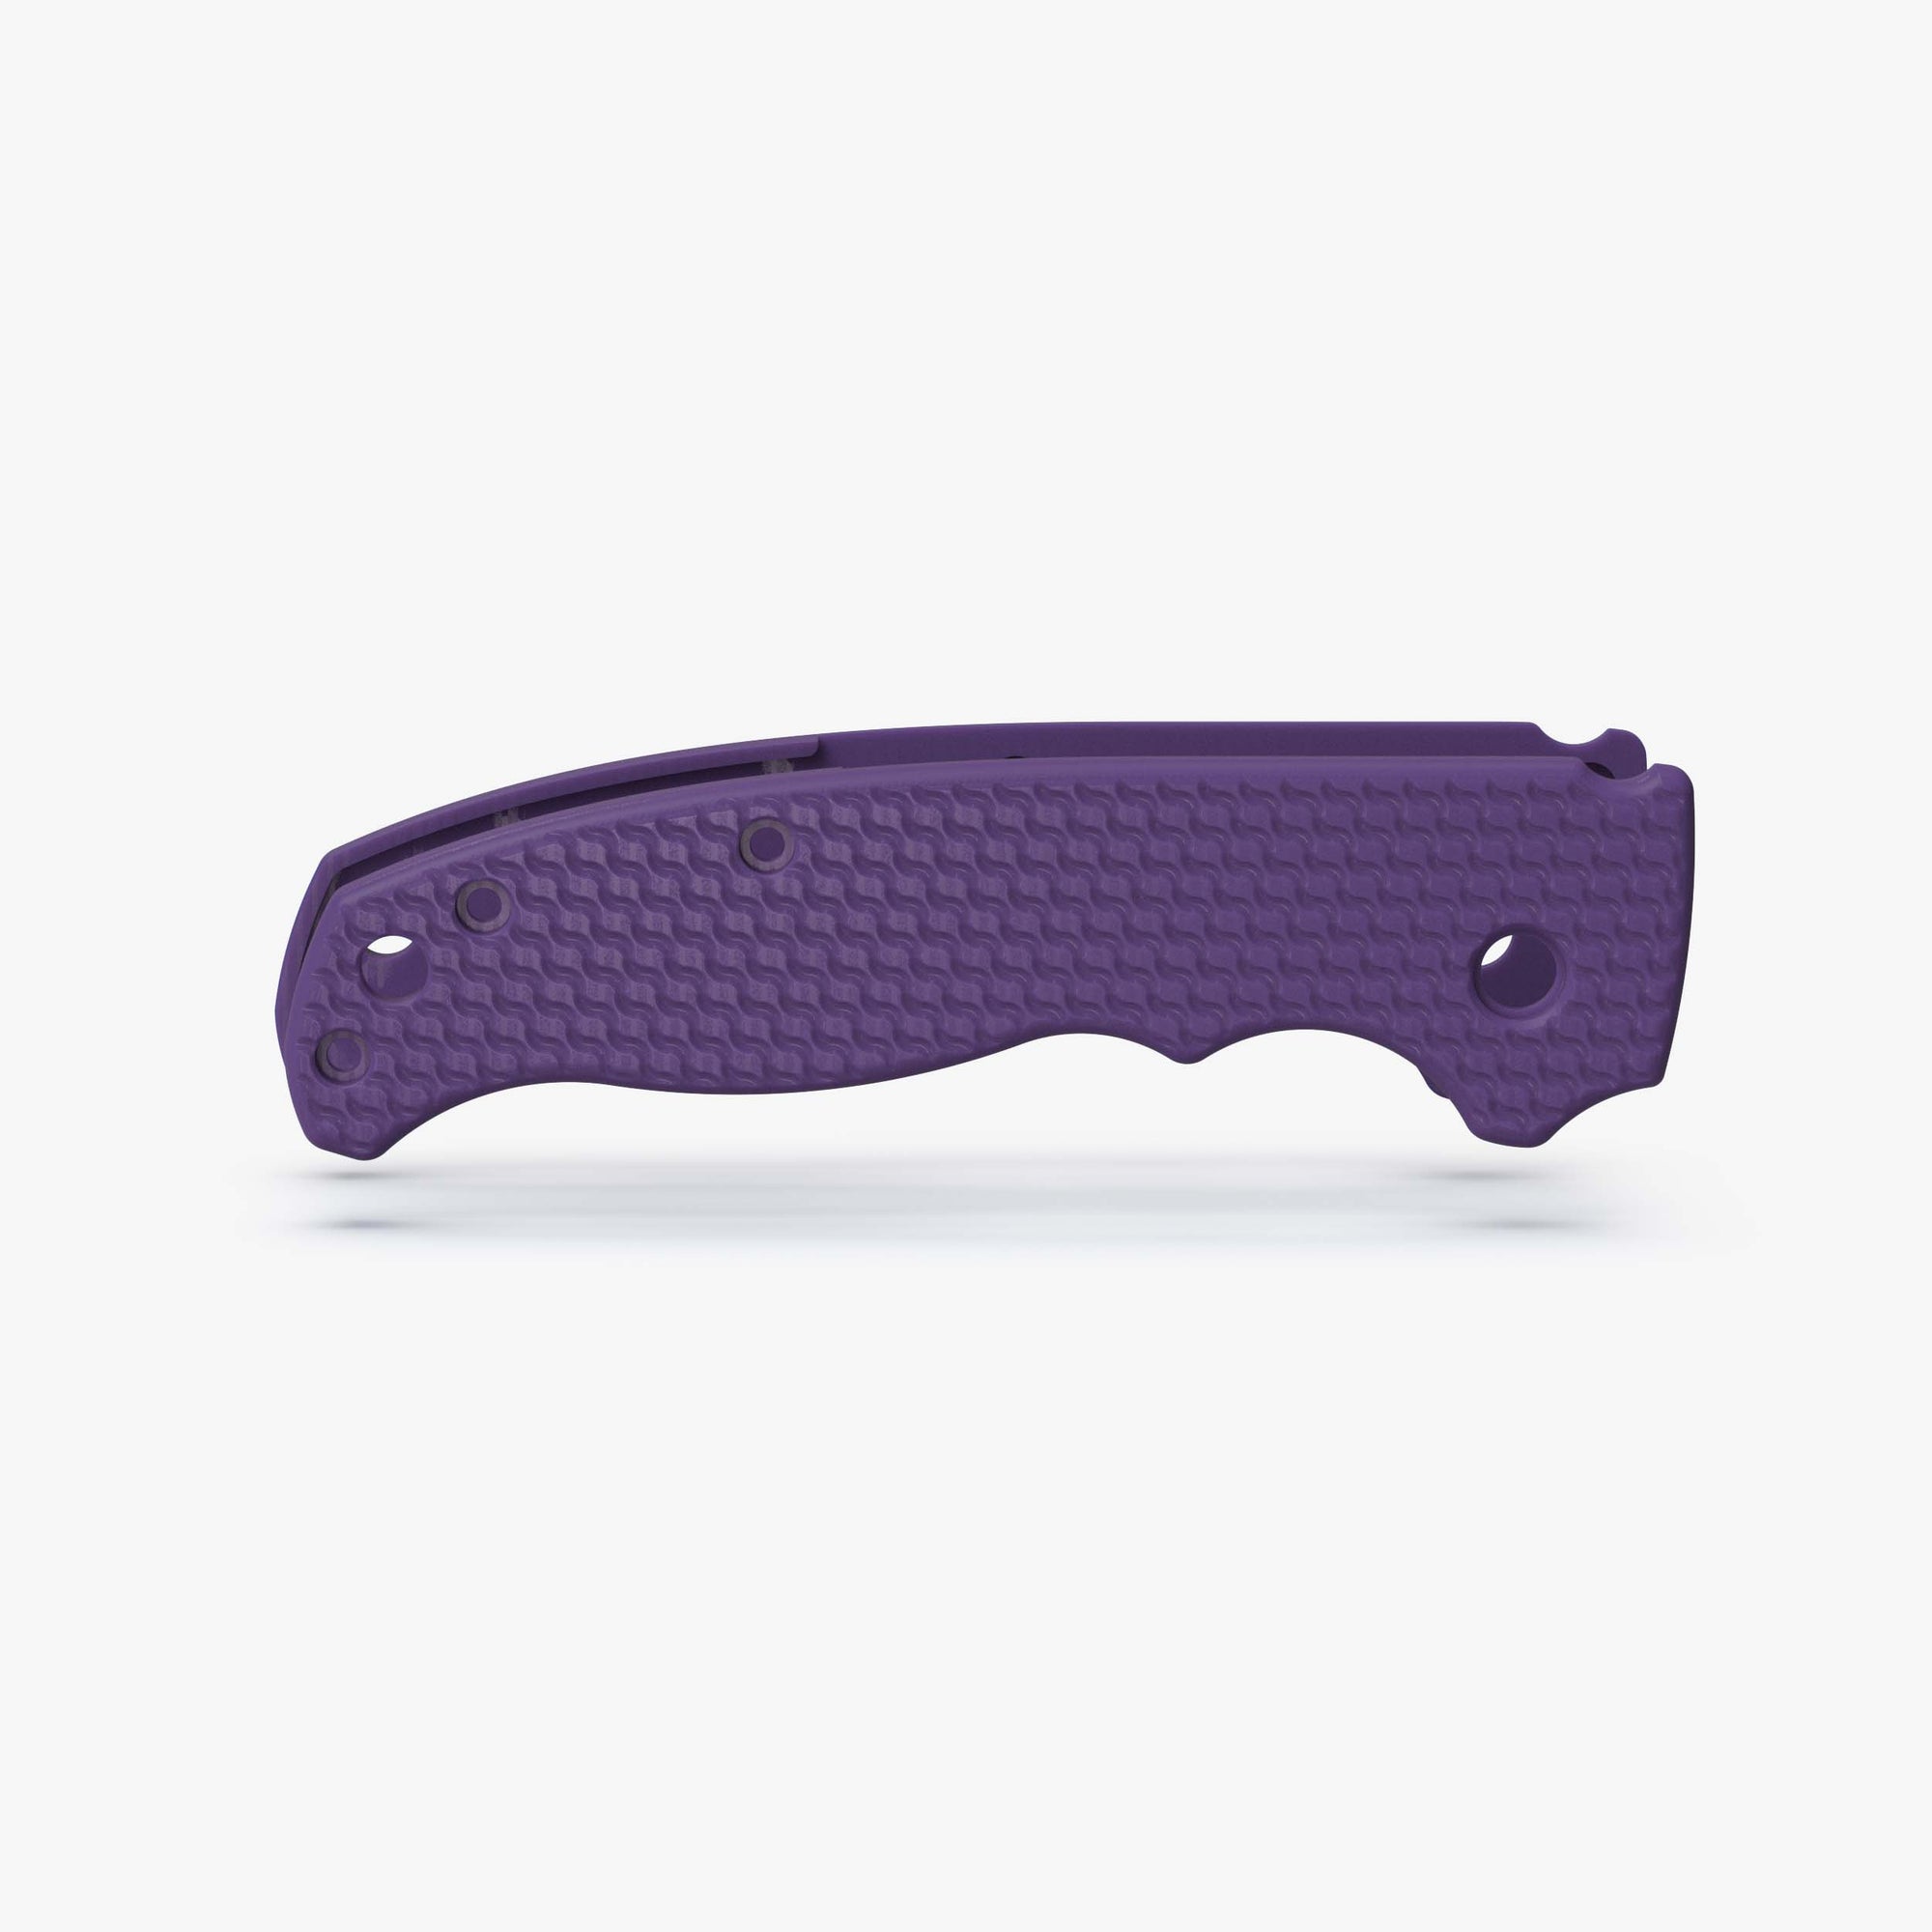 Wavelength Scales for Demko AD 20.5 Knife